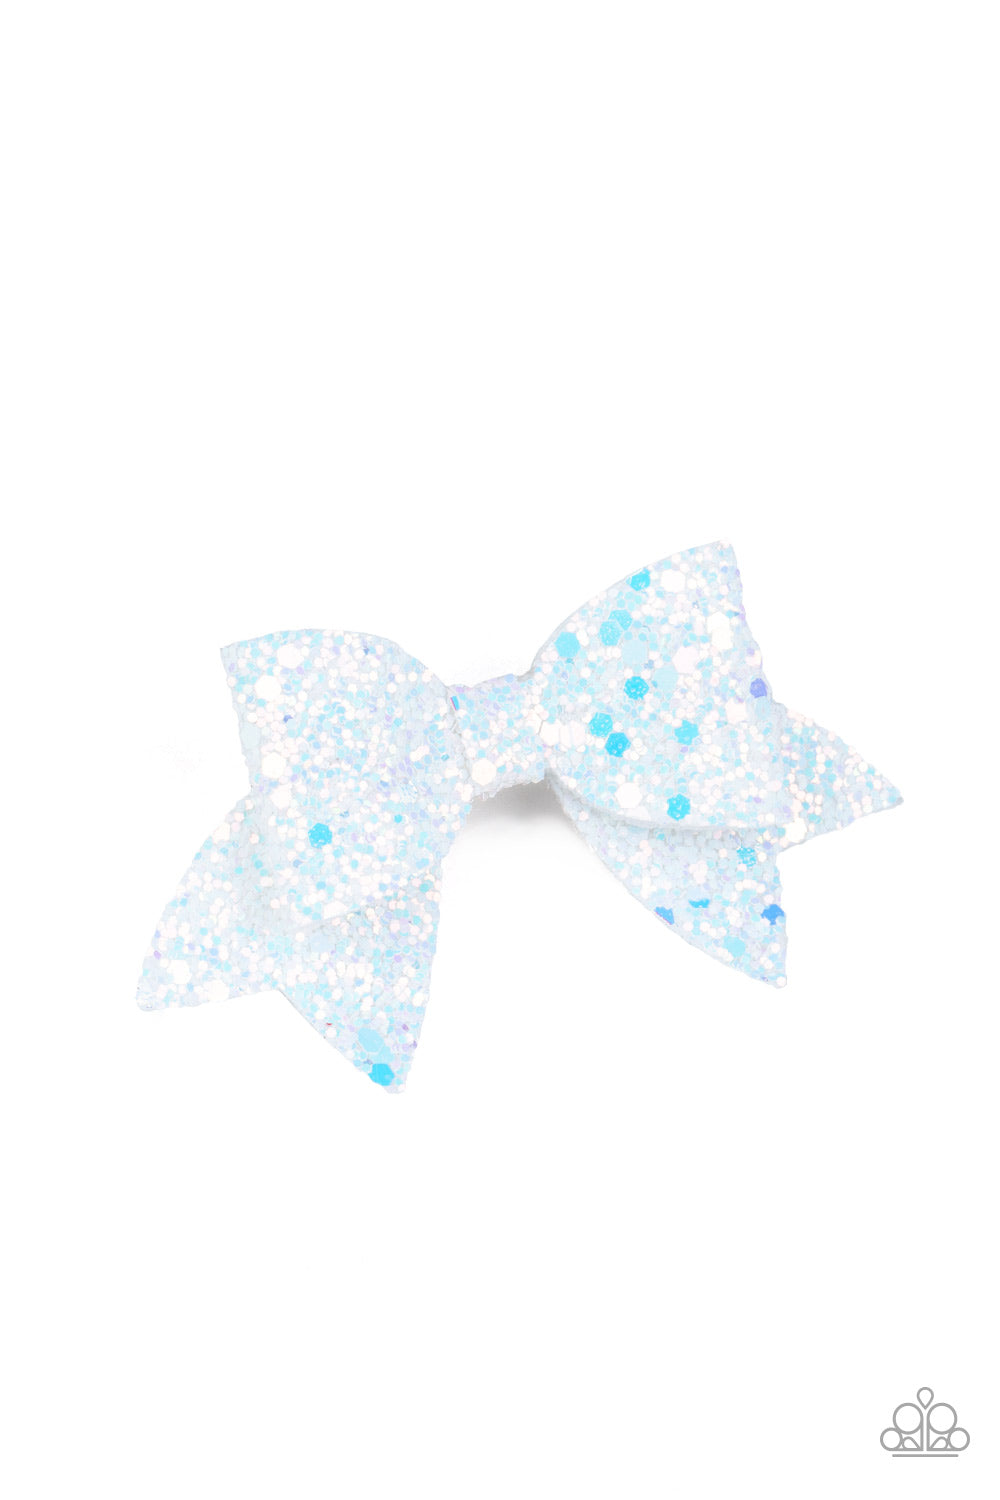 &lt;P&gt;Dusted in white sequins, glittery leather pieces delicately knot into a dainty bow. Features a standard hair clip on the back. &lt;/P&gt;

&lt;P&gt;&lt;I&gt;Sold as one individual hair clip.  &lt;/I&gt;&lt;/P&gt;


&lt;img src=\&quot;https://d9b54x484lq62.cloudfront.net/paparazzi/shopping/images/517_tag150x115_1.png\&quot; alt=\&quot;New Kit\&quot; align=\&quot;middle\&quot; height=\&quot;50\&quot; width=\&quot;50\&quot;/&gt;